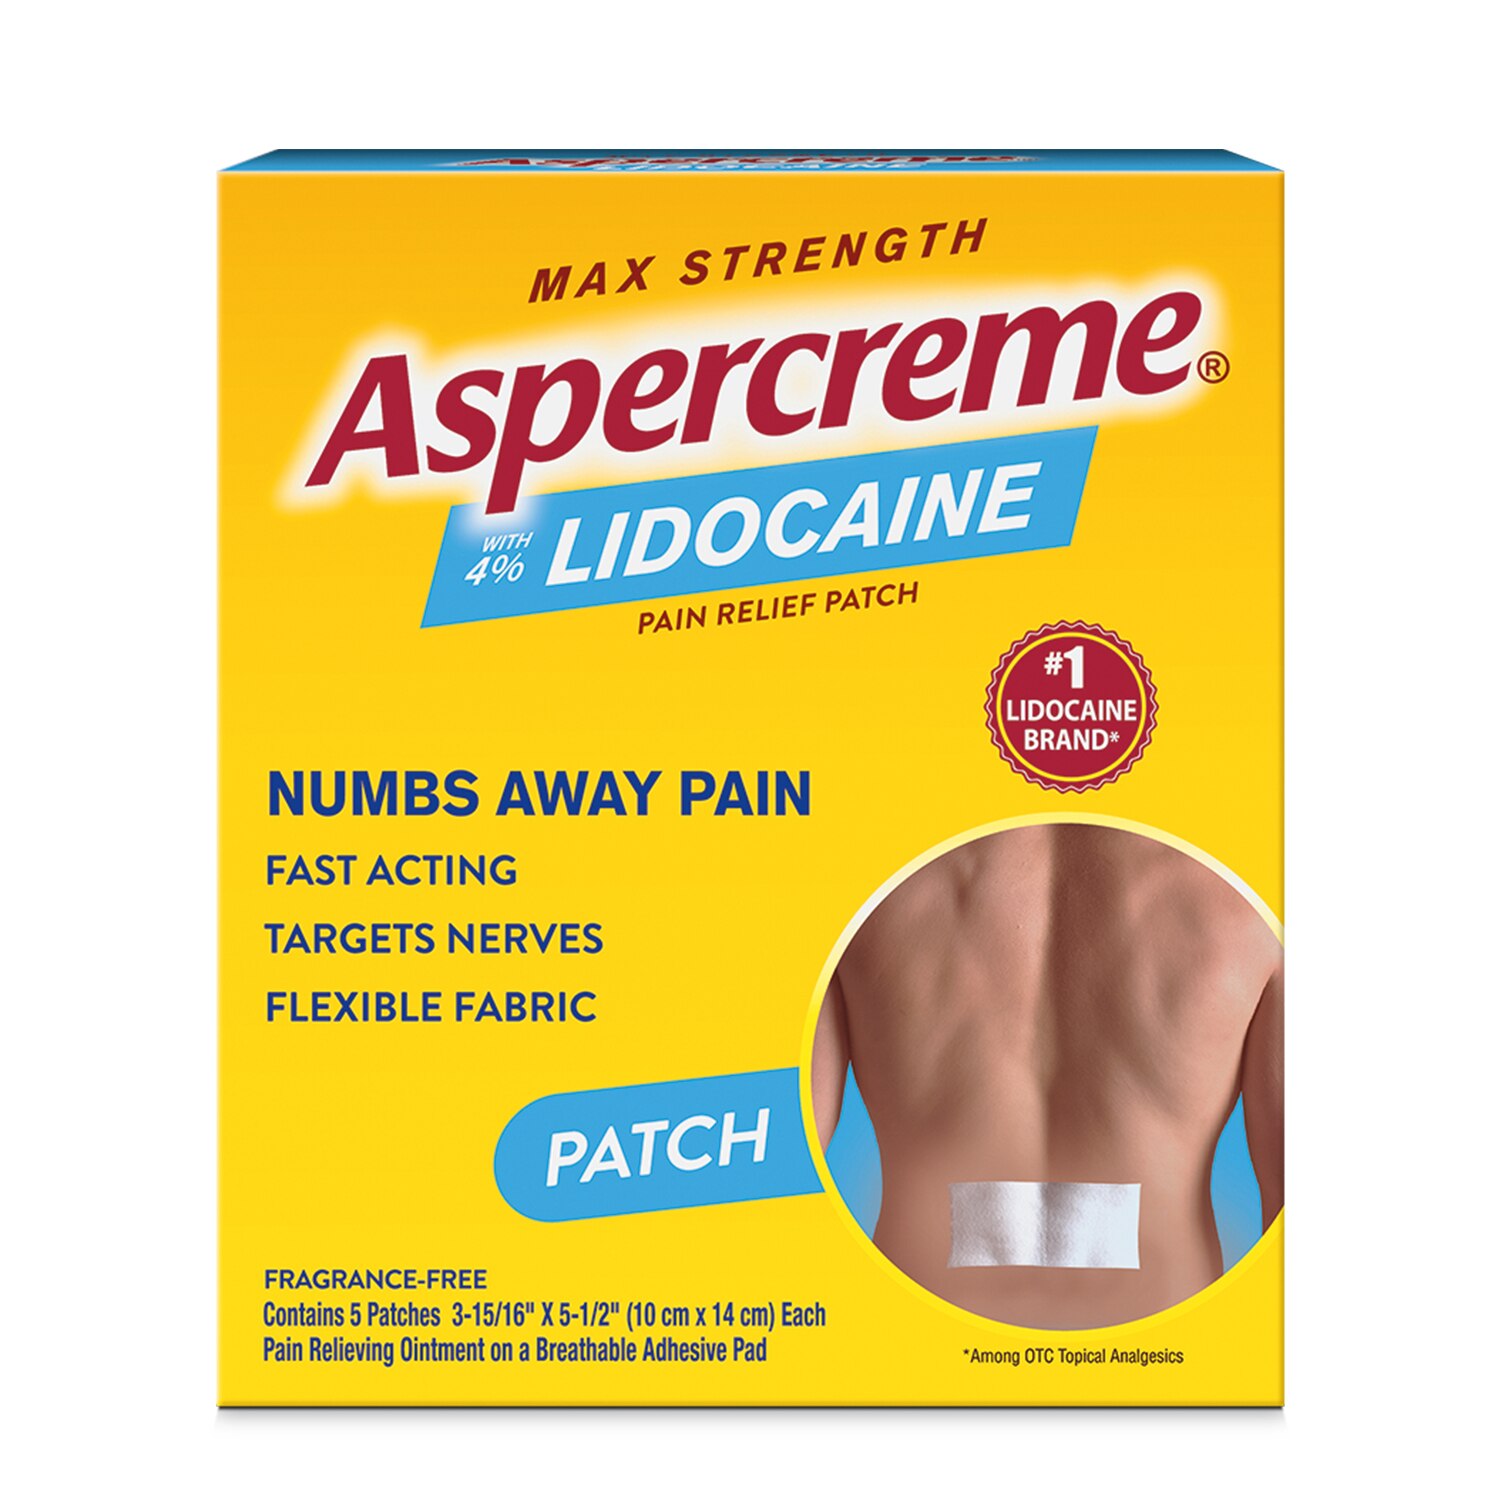 aspercreme-odor-free-max-strength-lidocaine-pain-relief-patch-for-back